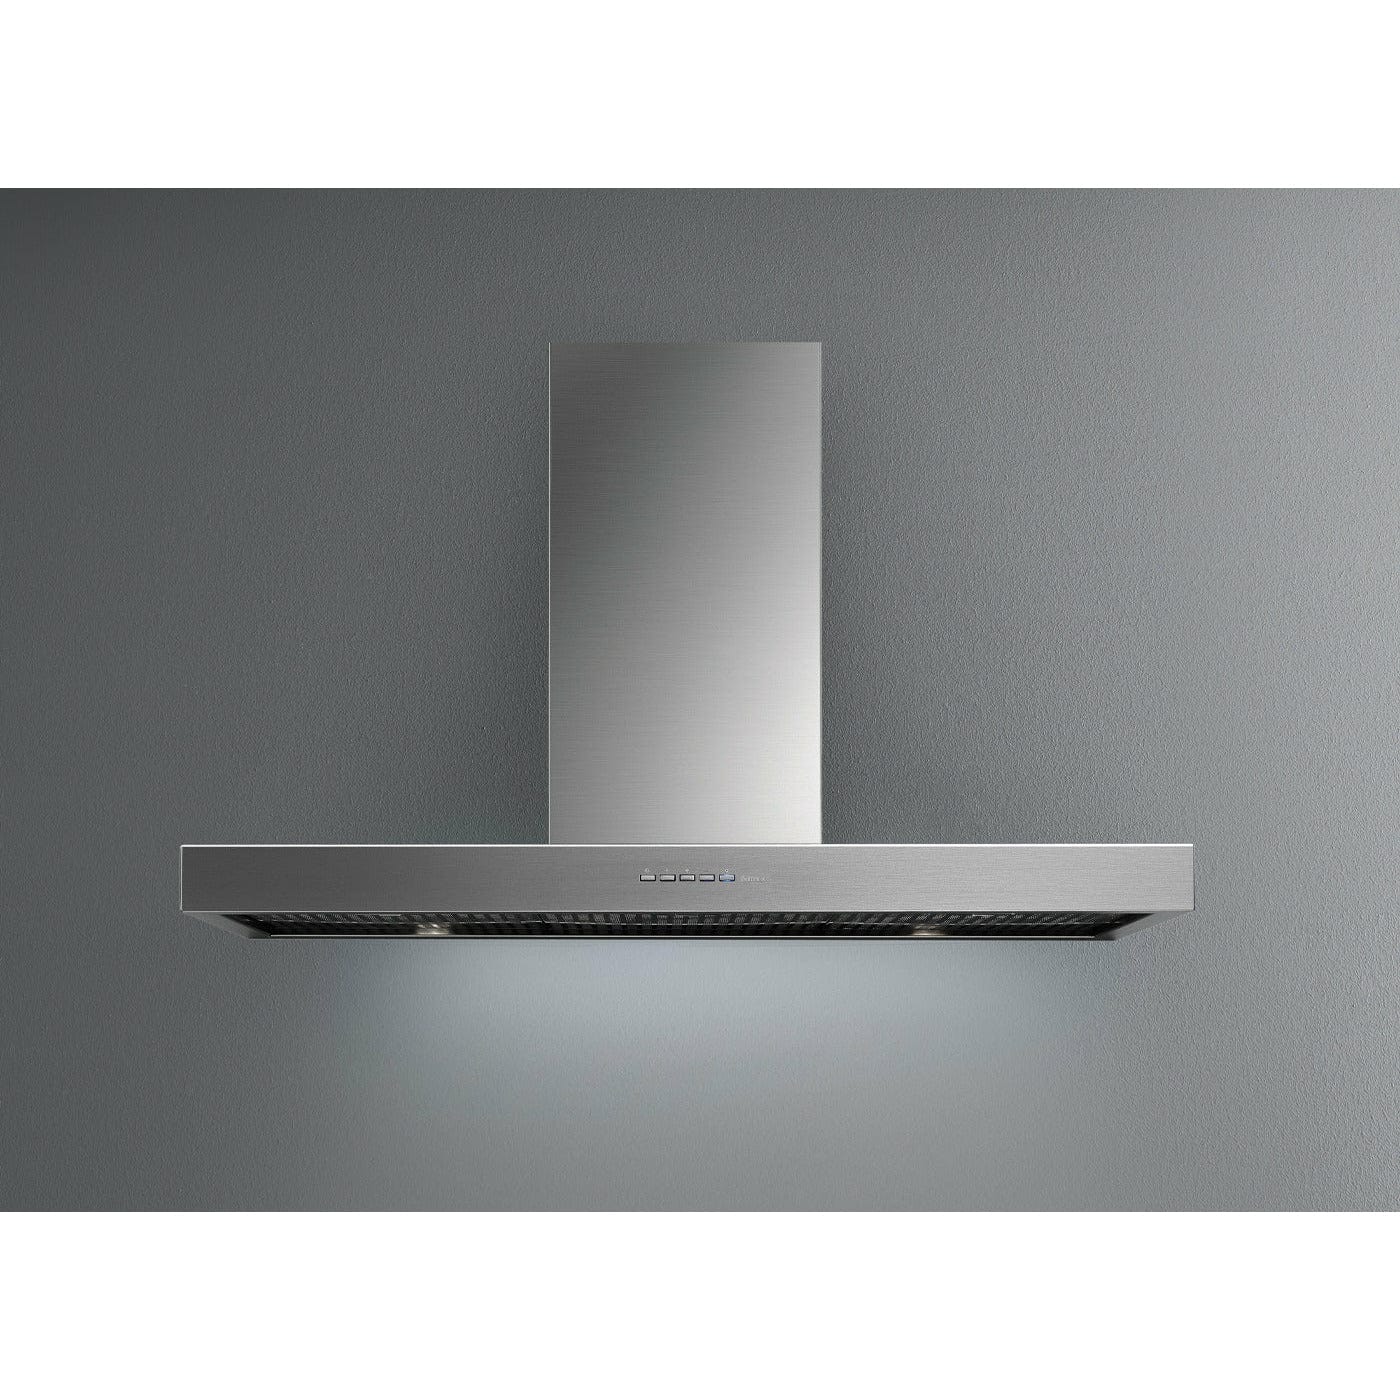 Falmec Mercurio XL Hood, 600 CFM with 4-Speed 600 CFM Motor, LED Lights, Electronic Controls, Washable Safe Baffle Filter, and AISI 304 Steel in Stainless Steel - FPMEX6SS-R Range Hoods FPMEX30W6SS-R Luxury Appliances Direct